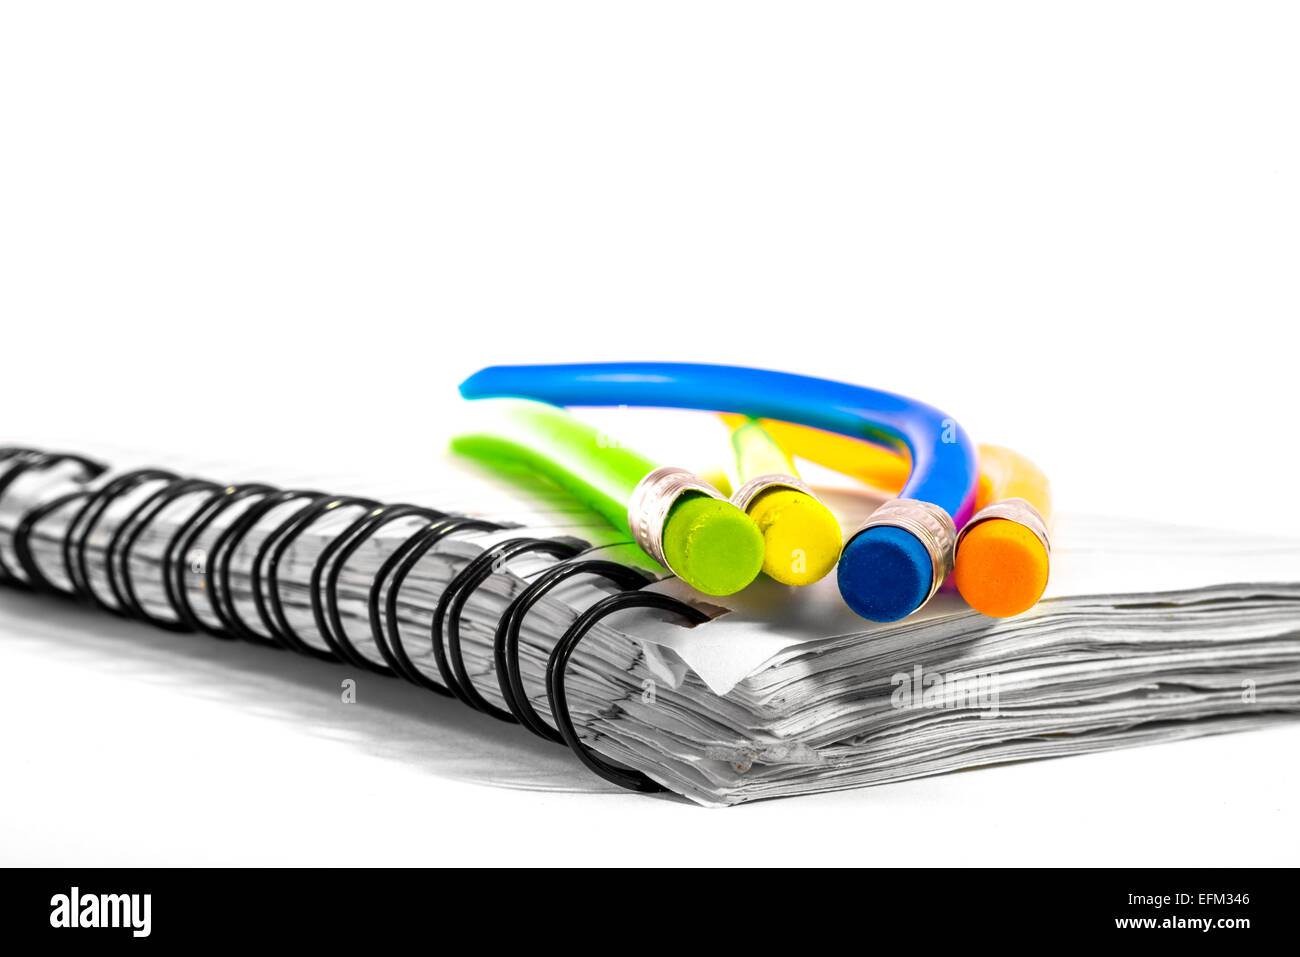 Colorful bend pencils together on a notebook. Stock Photo